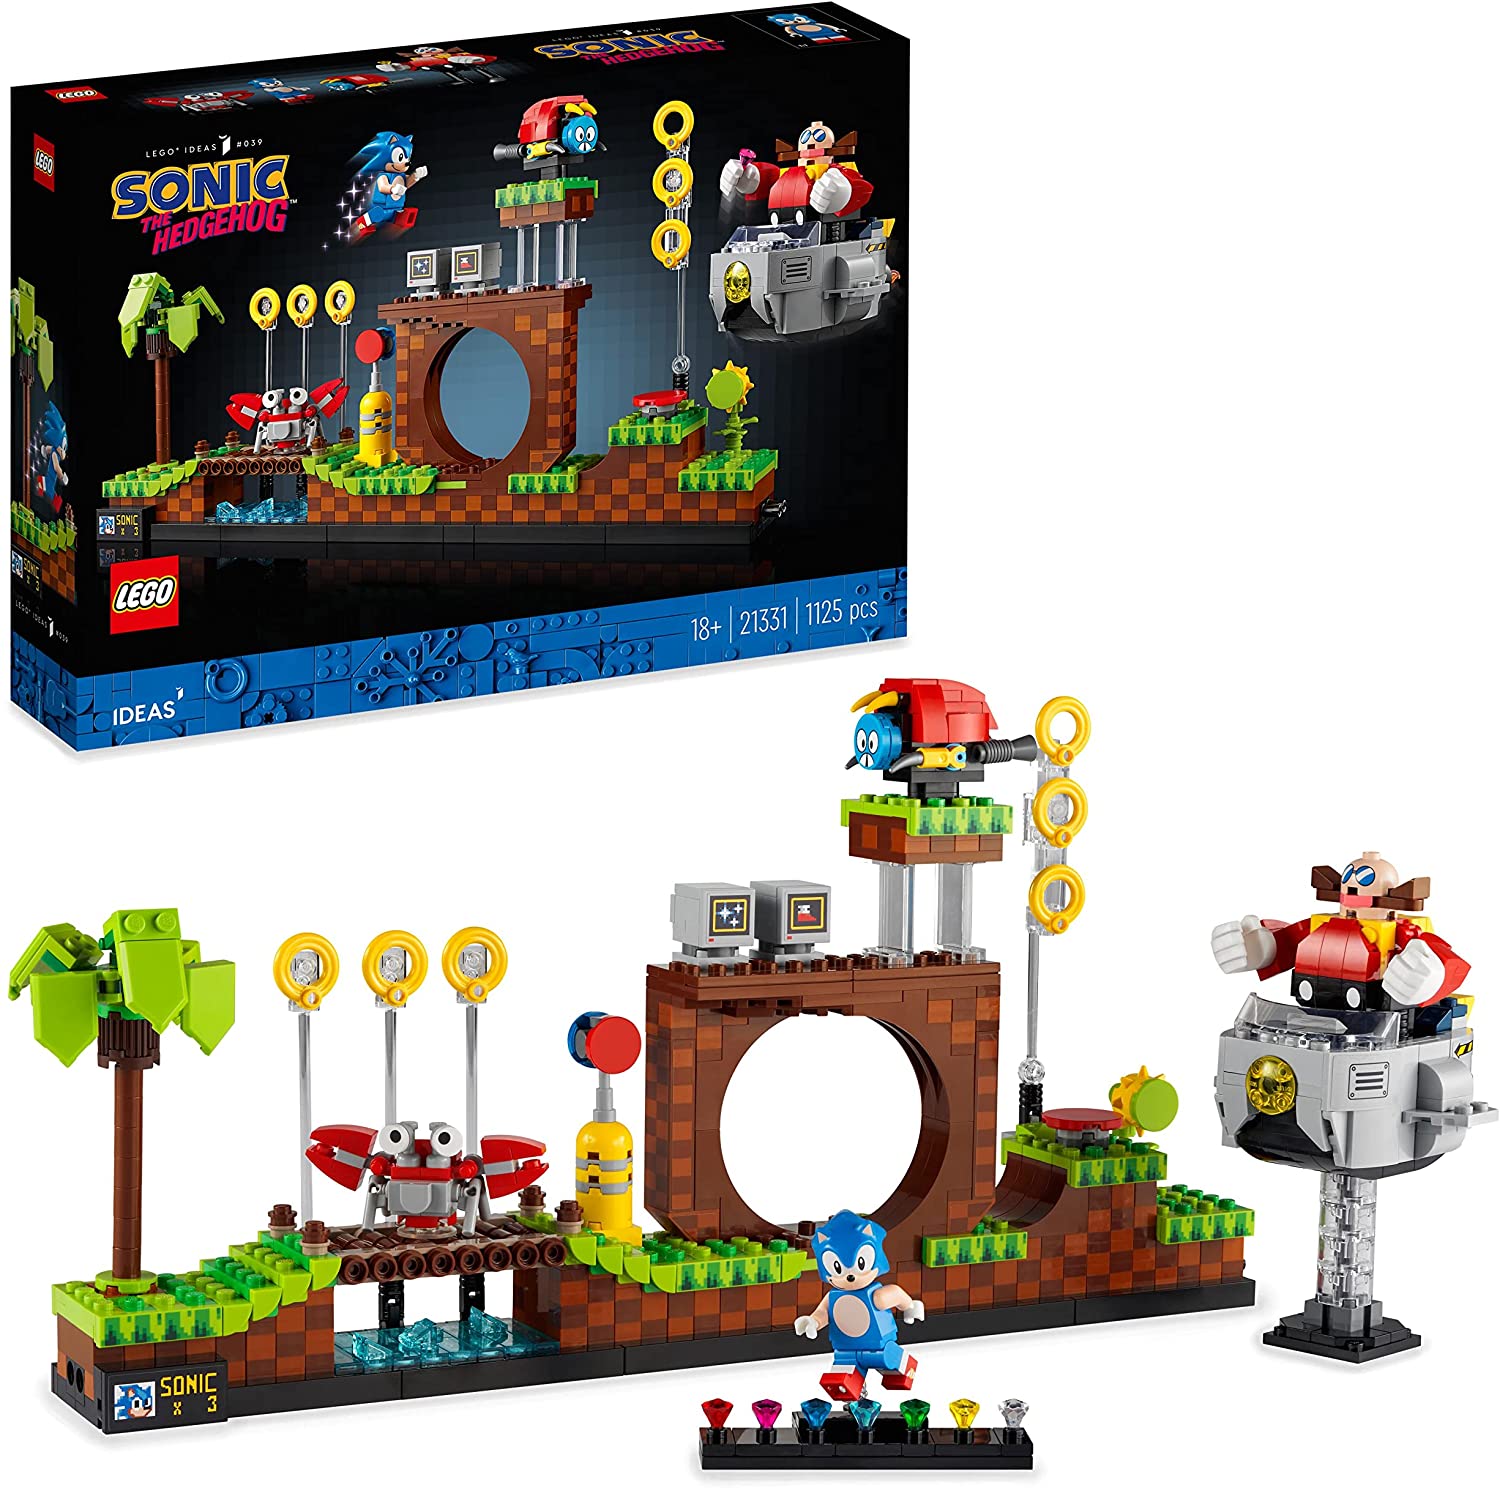 LEGO Ideas 21331 Sonic The Hedgehog - Green Hill Zone Set with Dr. Eggmann, Egg-Mobil and Other Figures, Gift Idea for Adults